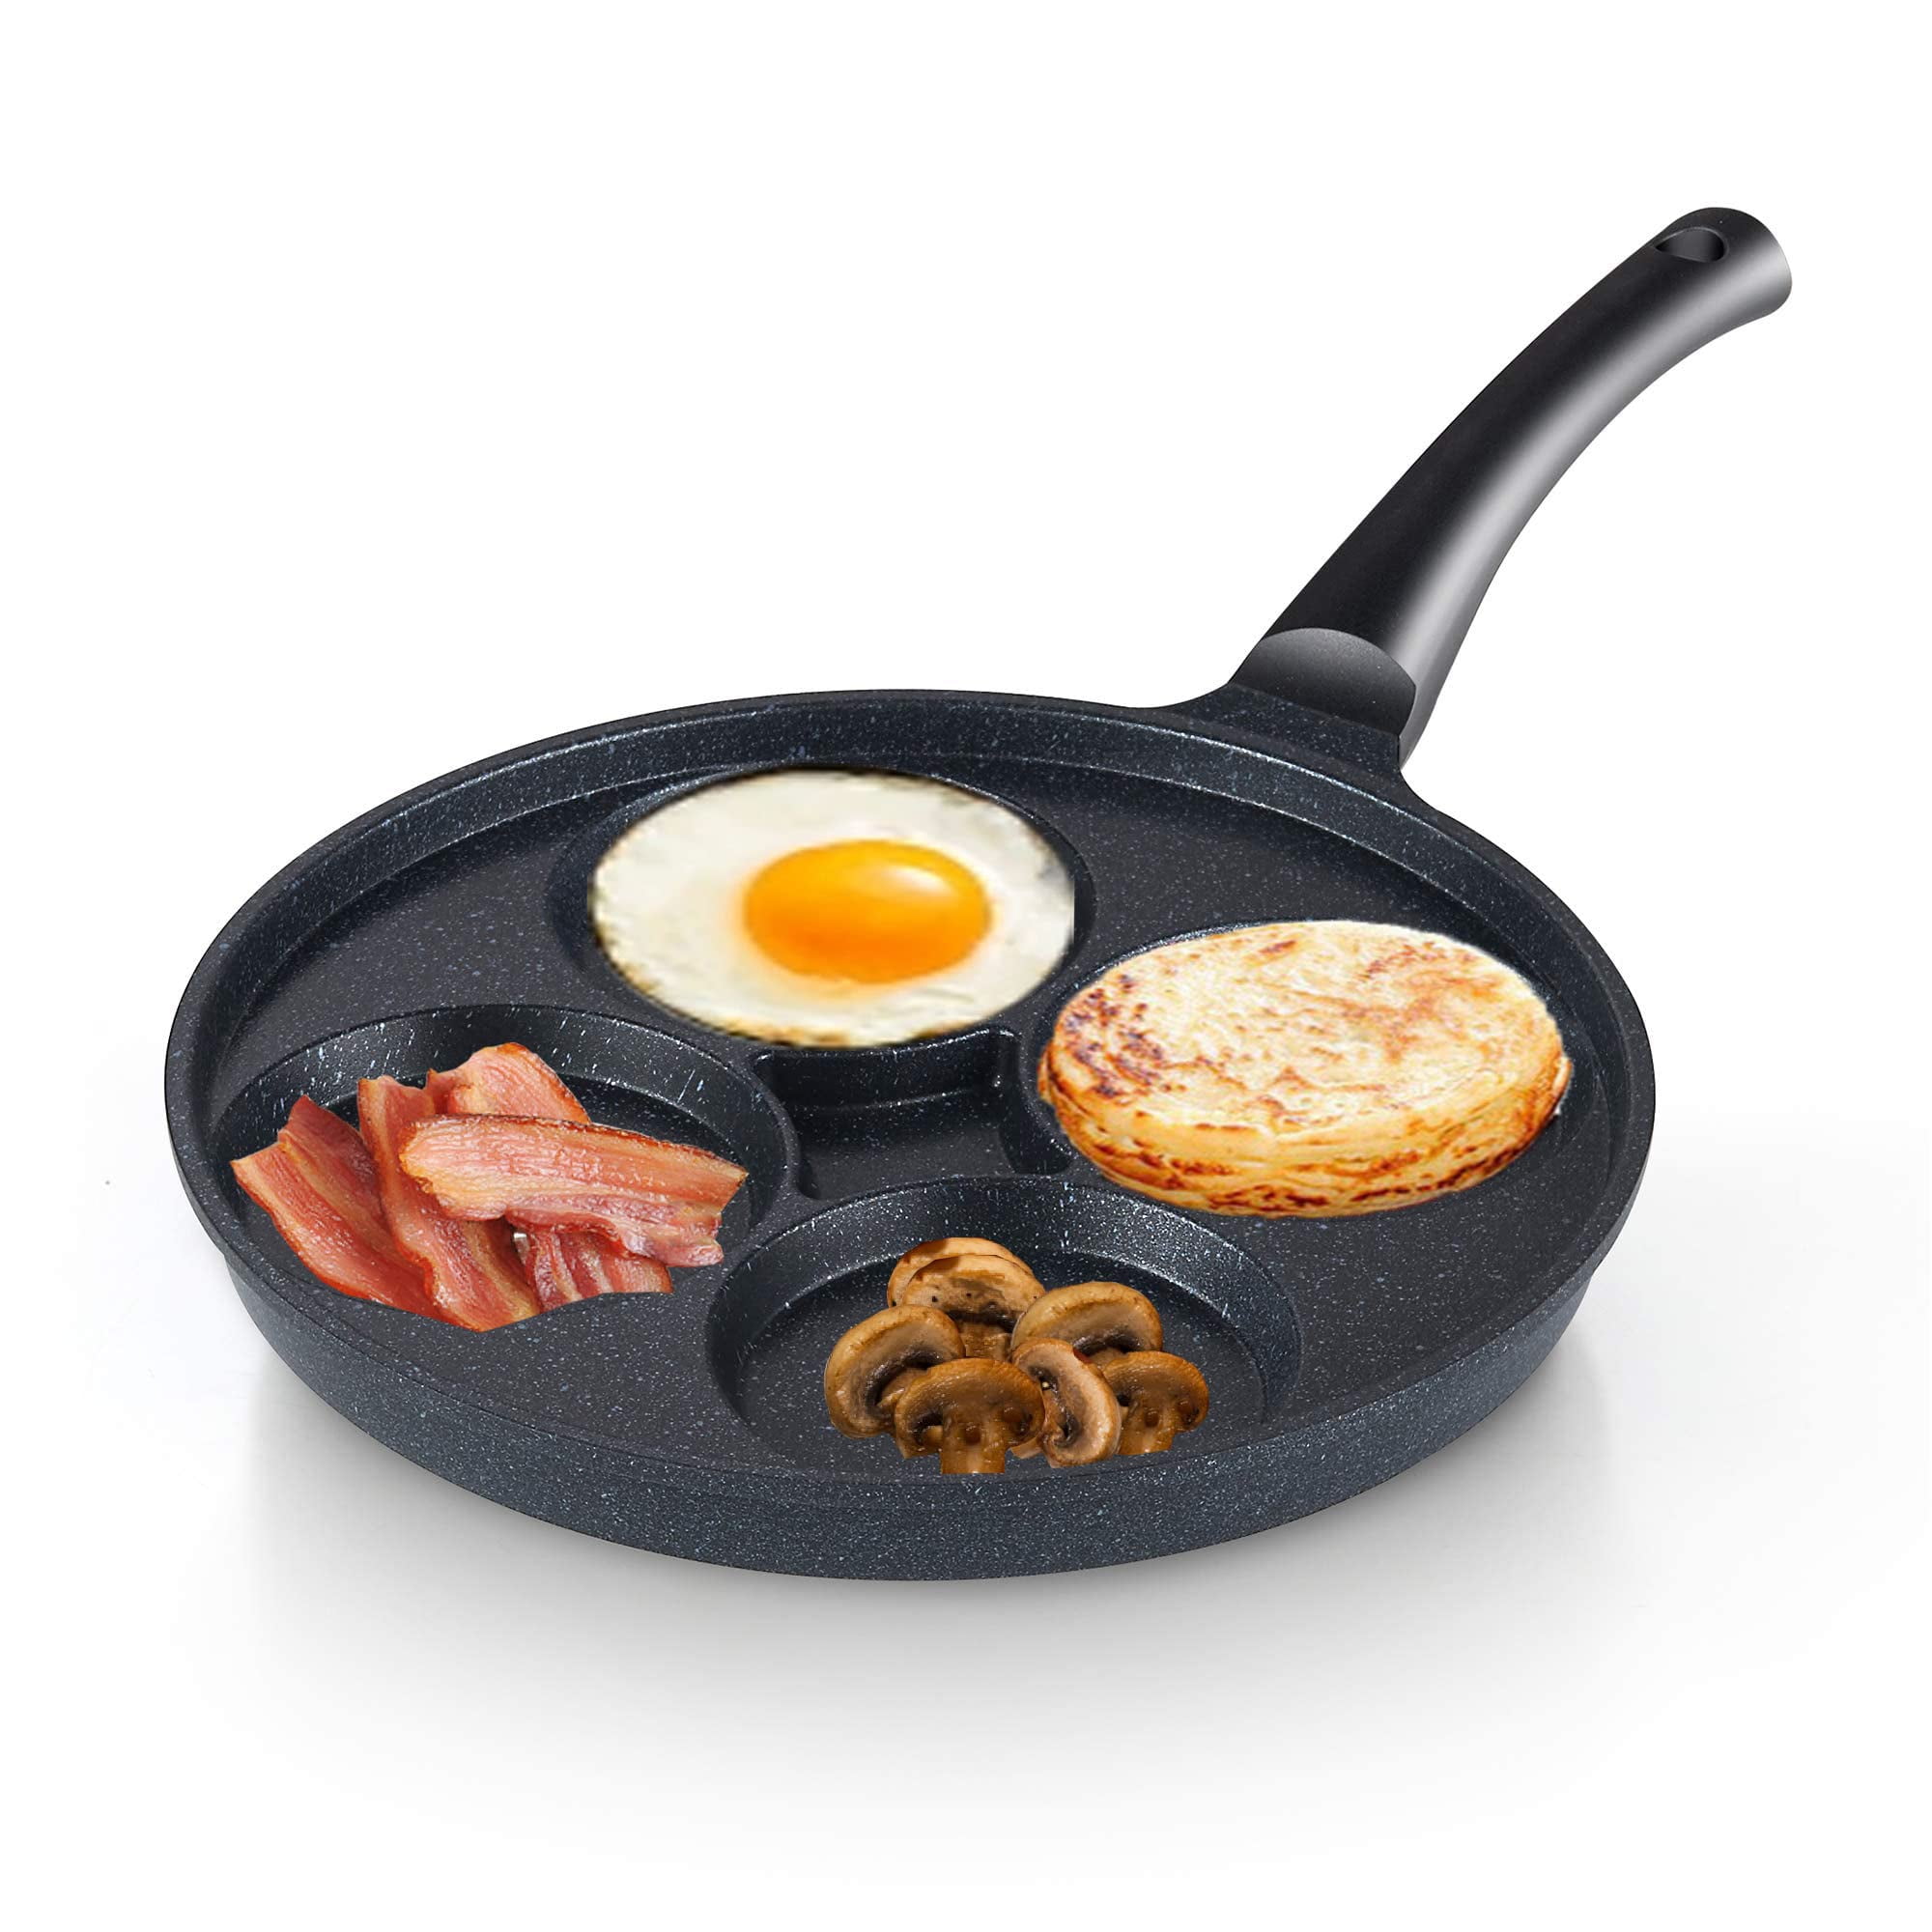 143 4-Hole Egg Frying Pan 4- Pan Non-stick Frying Pan 4-Cup Egg Frying Pan  Maifan Stone Coating Egg Cooker Pan Compatible with All Heat Sources,for